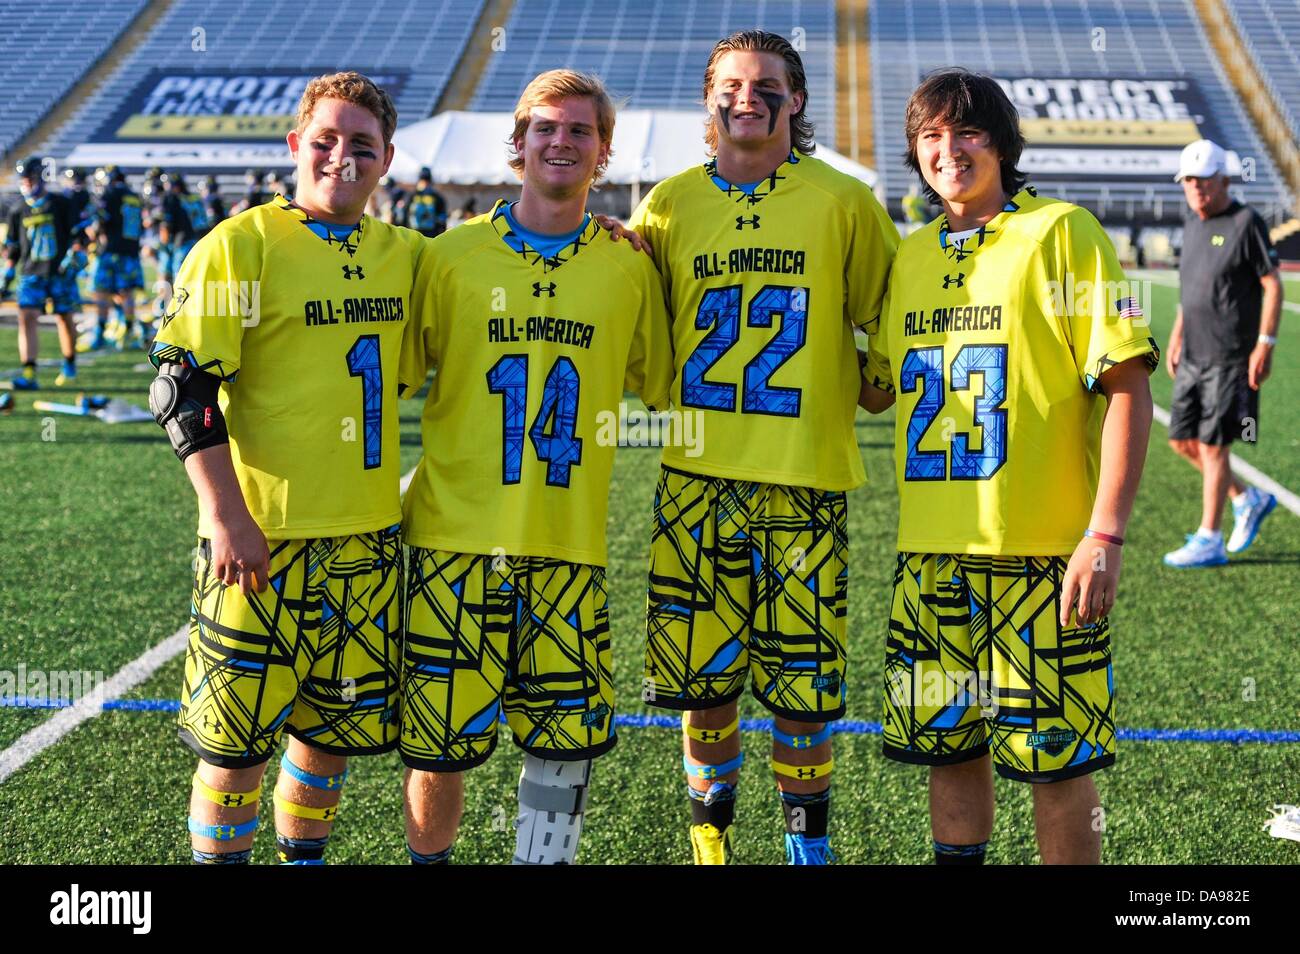 July 6, 2013 - Baltimore, MD, United States of America - July 6, 2013 Baltimore, MD.University of Maryland recruits Matt Rambo #1 Mac Pons #14 Colin Heacock #22 and Dan Morris #23 pose for a photo during the 8th Annual Under Armour All-American Lacrosse Classic at Johnny Unitas Stadium Baltimore on July 6, 2013..South defeats North 28-24. Stock Photo